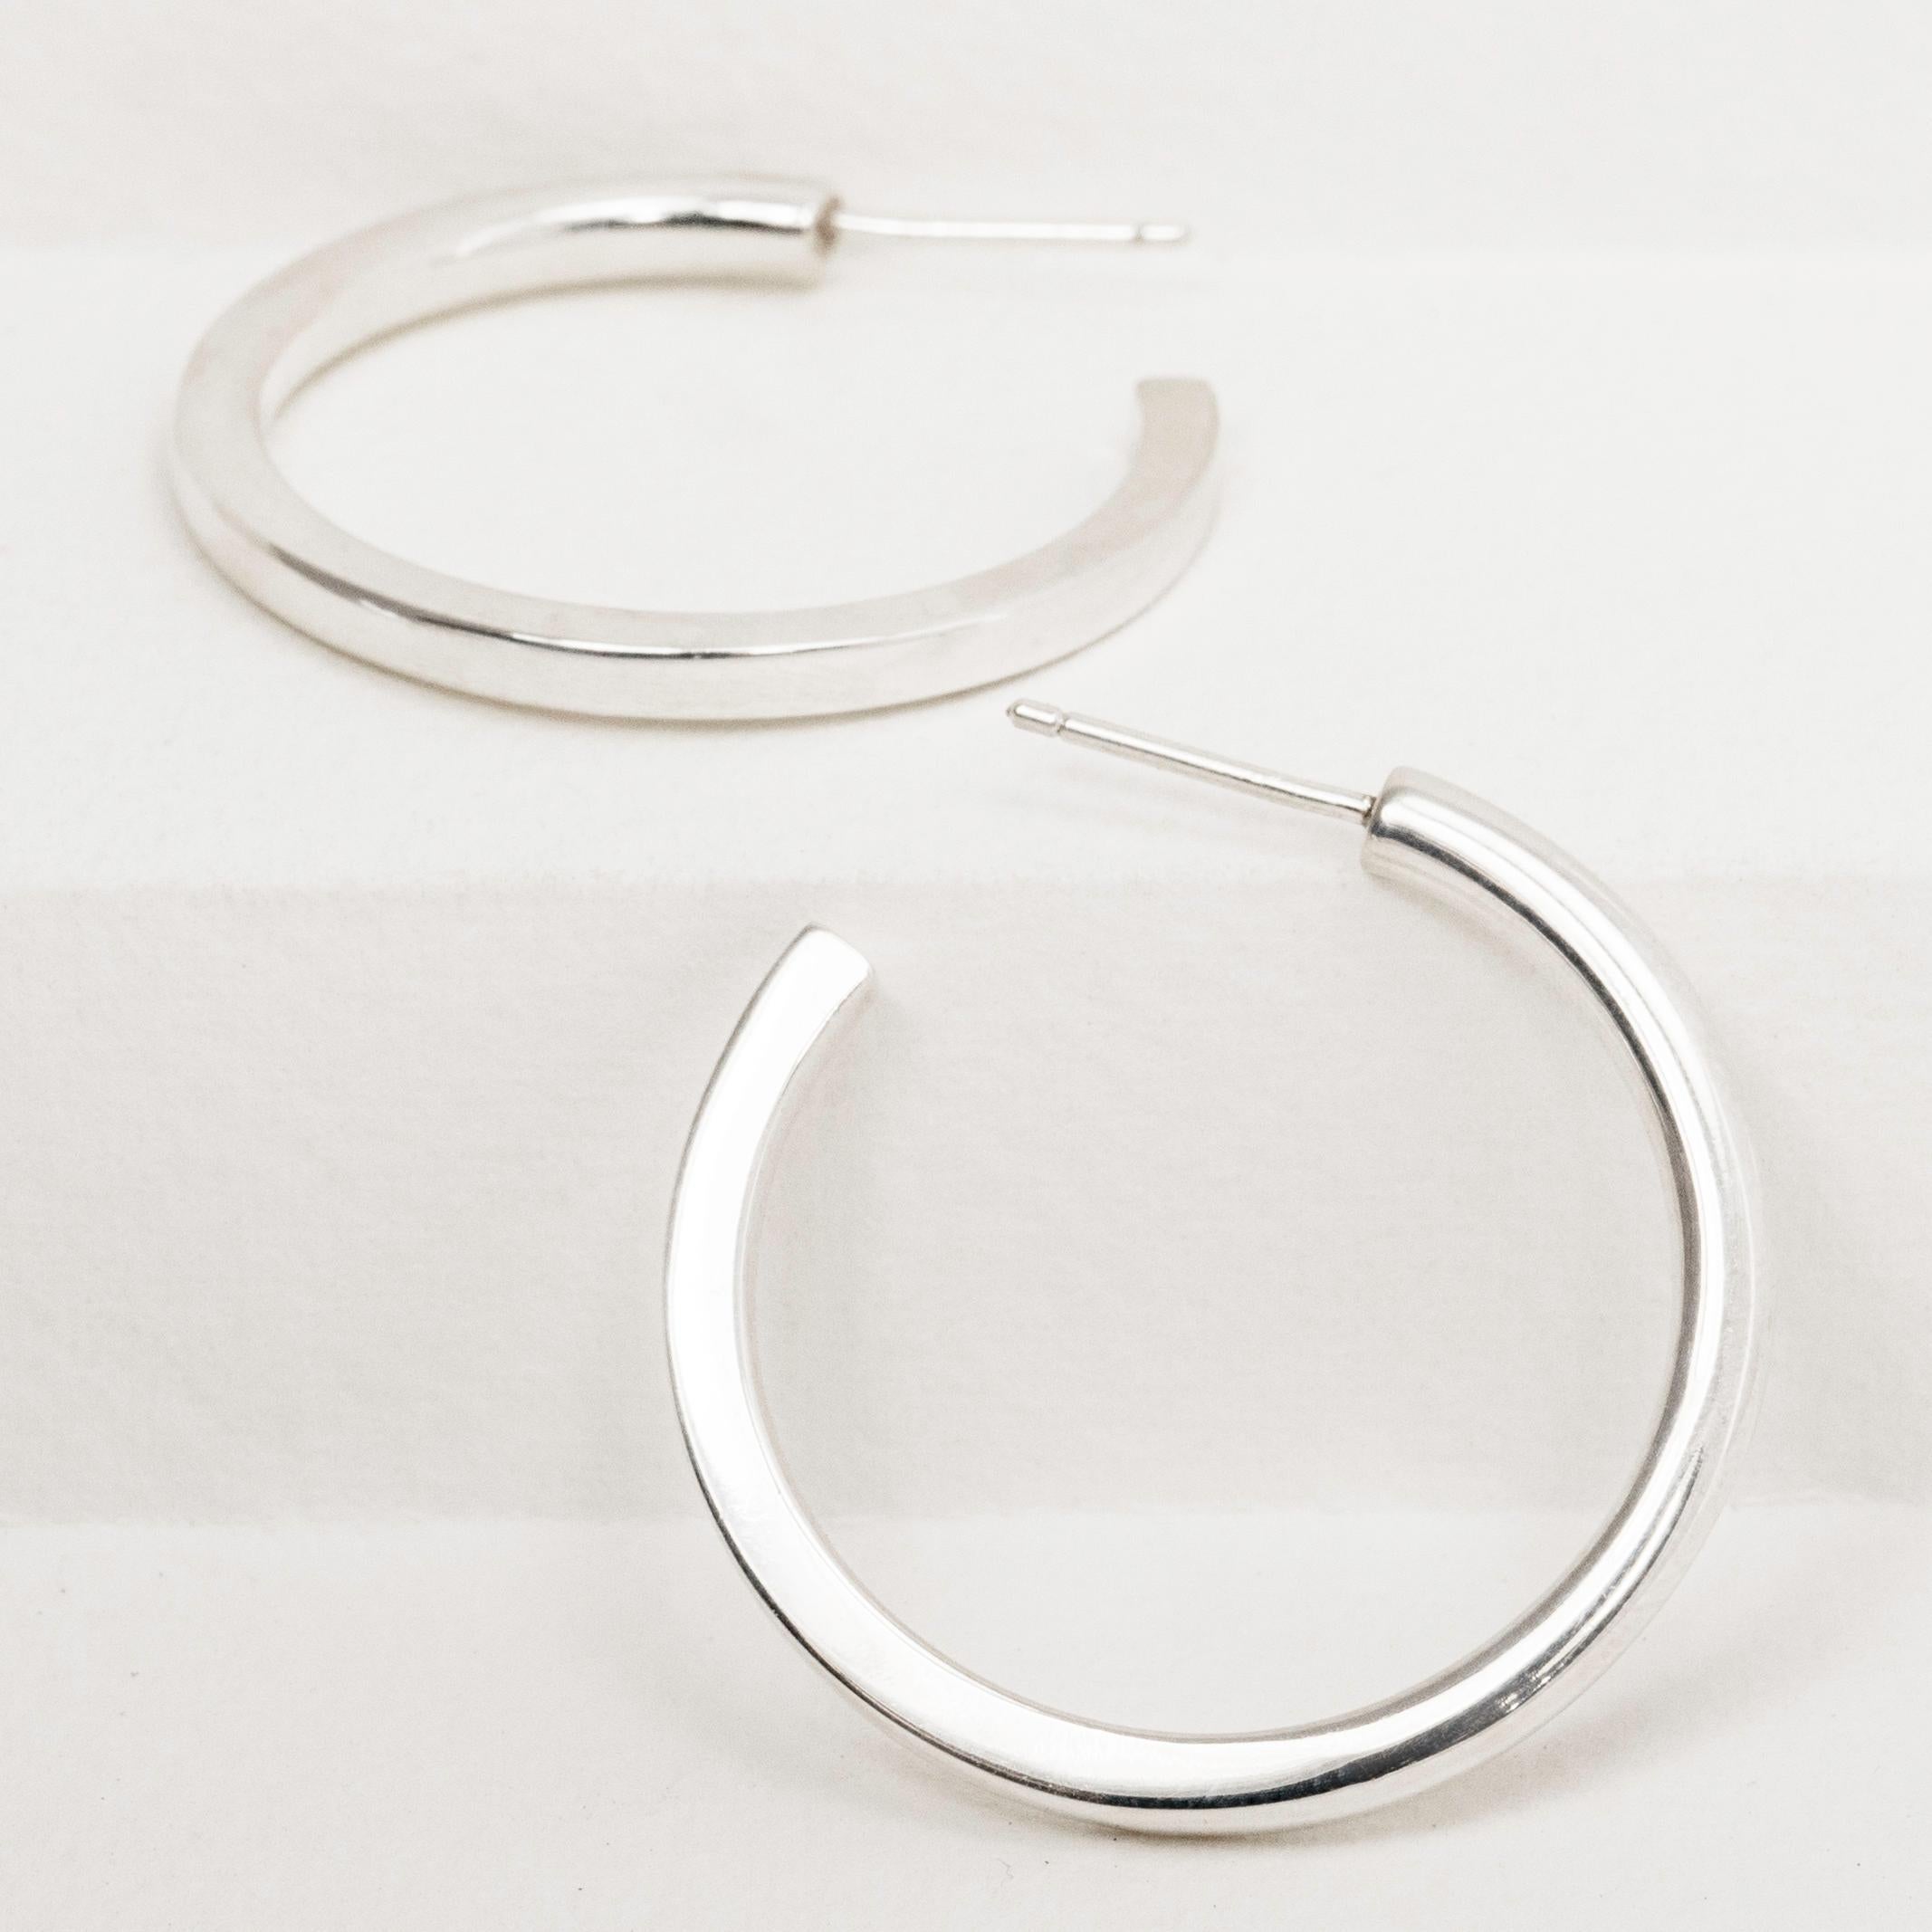 logo earrings with circle and square